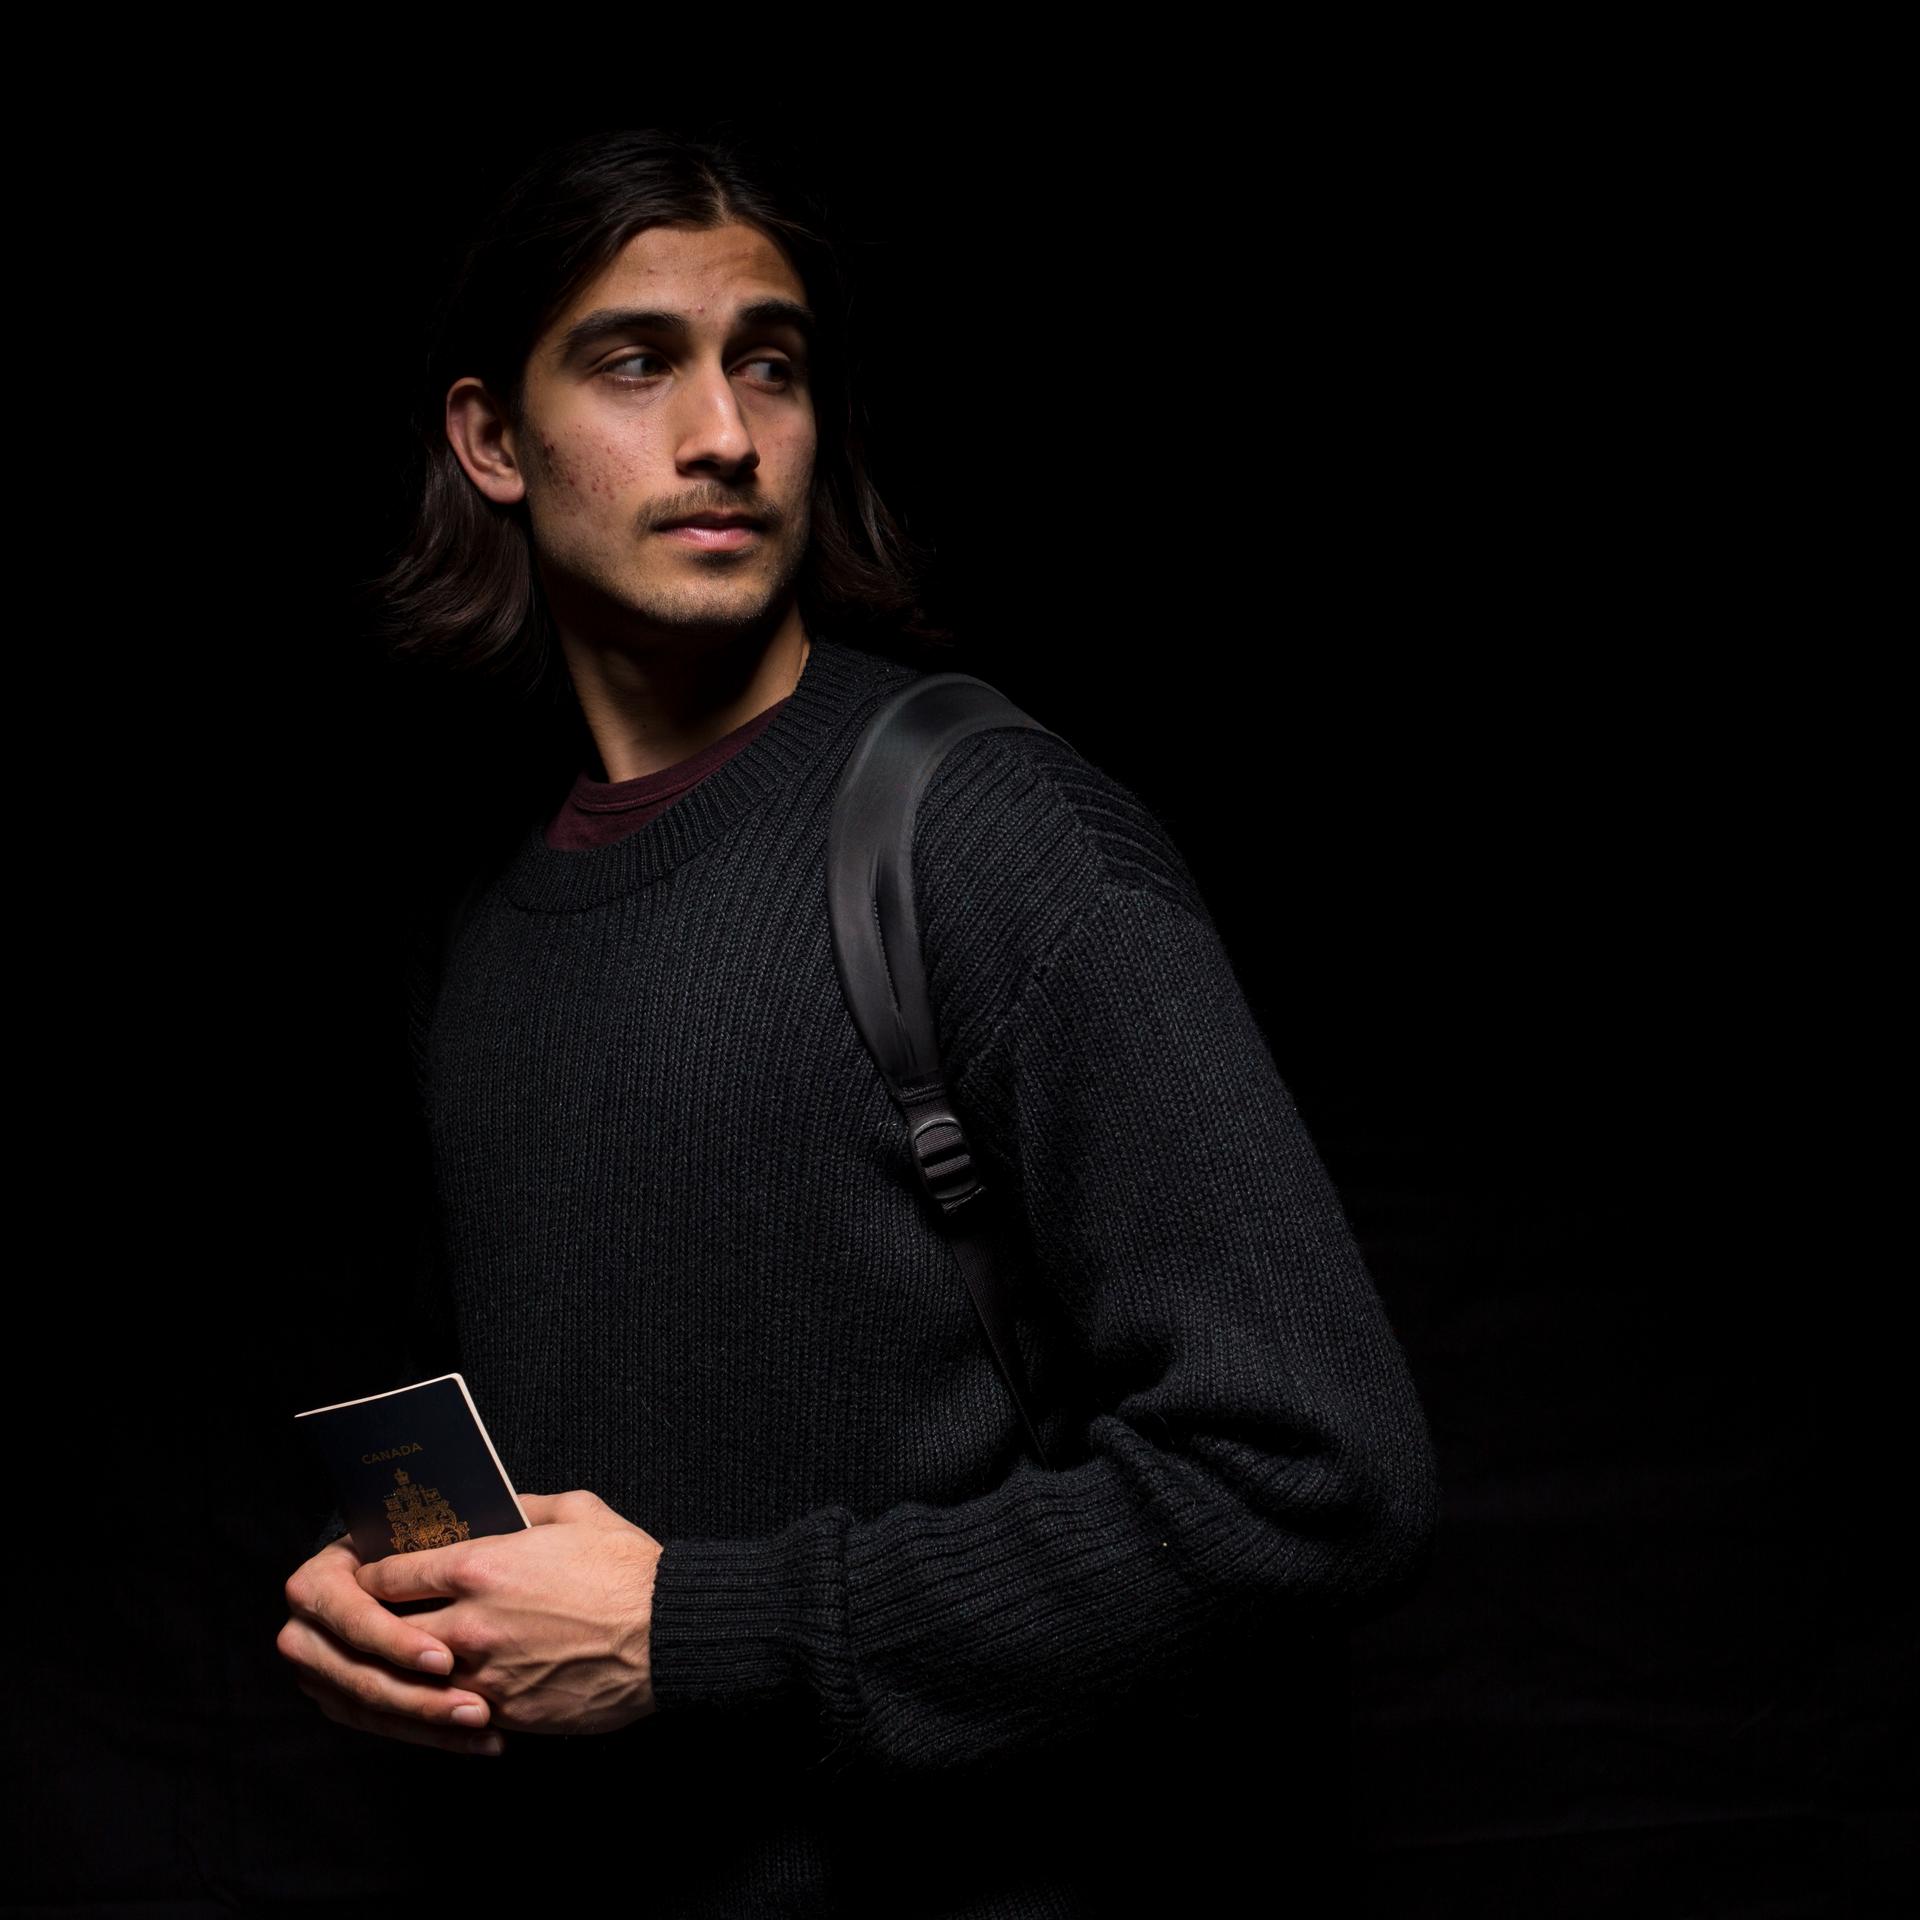 Young man with backpack and tablet, against a black background